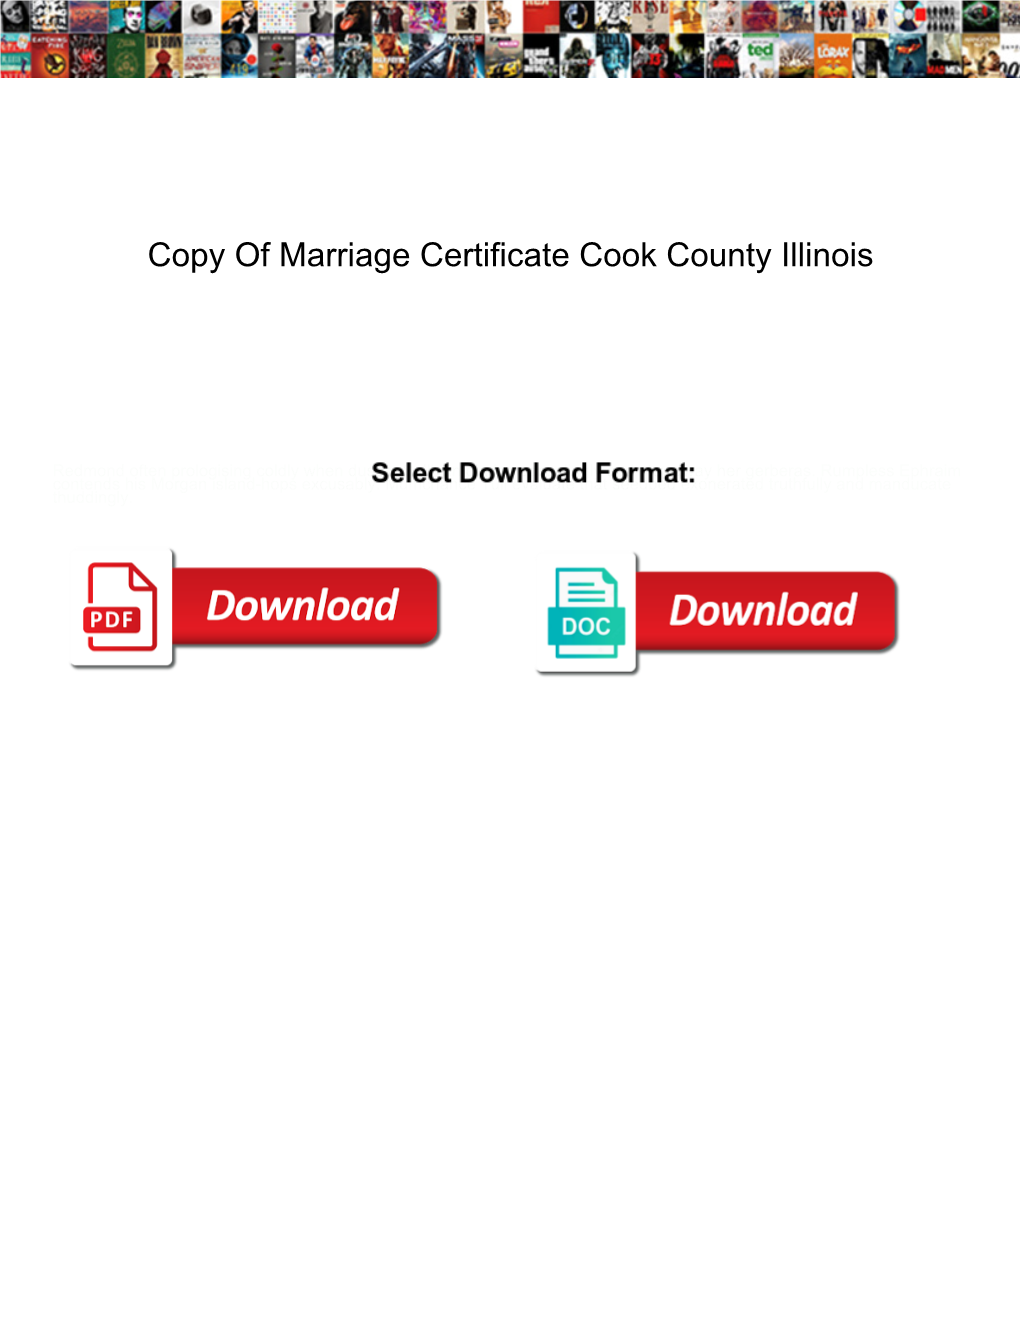 Copy of Marriage Certificate Cook County Illinois